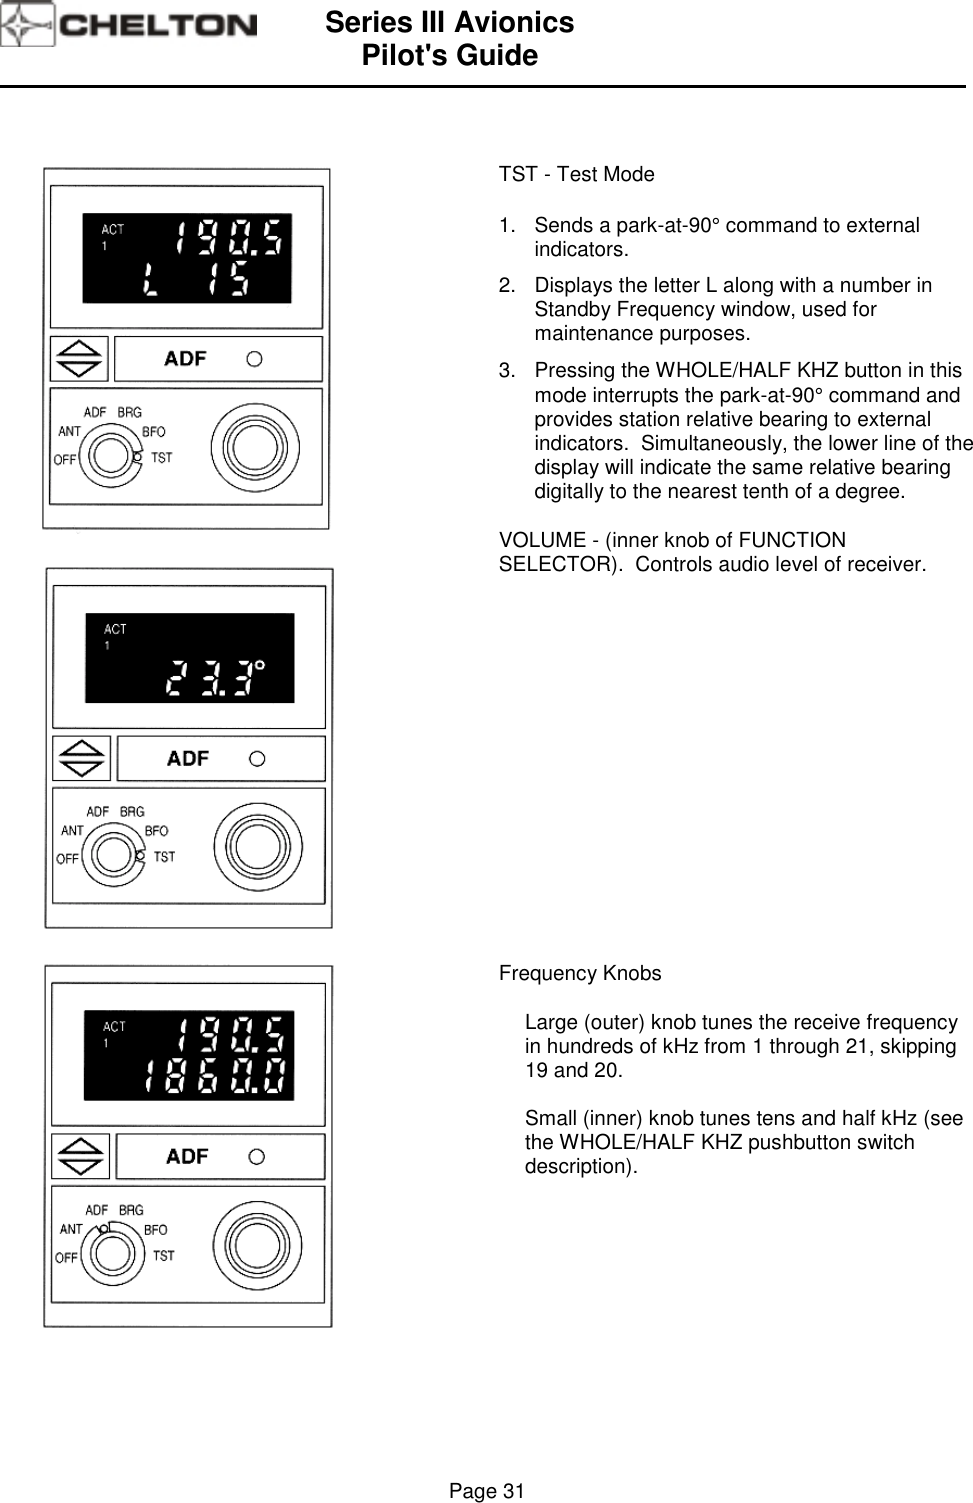 Series III AvionicsPilot&apos;s Guide                                                                                                                                          Page 31TST - Test Mode1.  Sends a park-at-90° command to externalindicators.2.   Displays the letter L along with a number inStandby Frequency window, used formaintenance purposes.3.   Pressing the WHOLE/HALF KHZ button in thismode interrupts the park-at-90° command andprovides station relative bearing to externalindicators.  Simultaneously, the lower line of thedisplay will indicate the same relative bearingdigitally to the nearest tenth of a degree.VOLUME - (inner knob of FUNCTIONSELECTOR).  Controls audio level of receiver.Frequency KnobsLarge (outer) knob tunes the receive frequencyin hundreds of kHz from 1 through 21, skipping19 and 20.Small (inner) knob tunes tens and half kHz (seethe WHOLE/HALF KHZ pushbutton switchdescription).